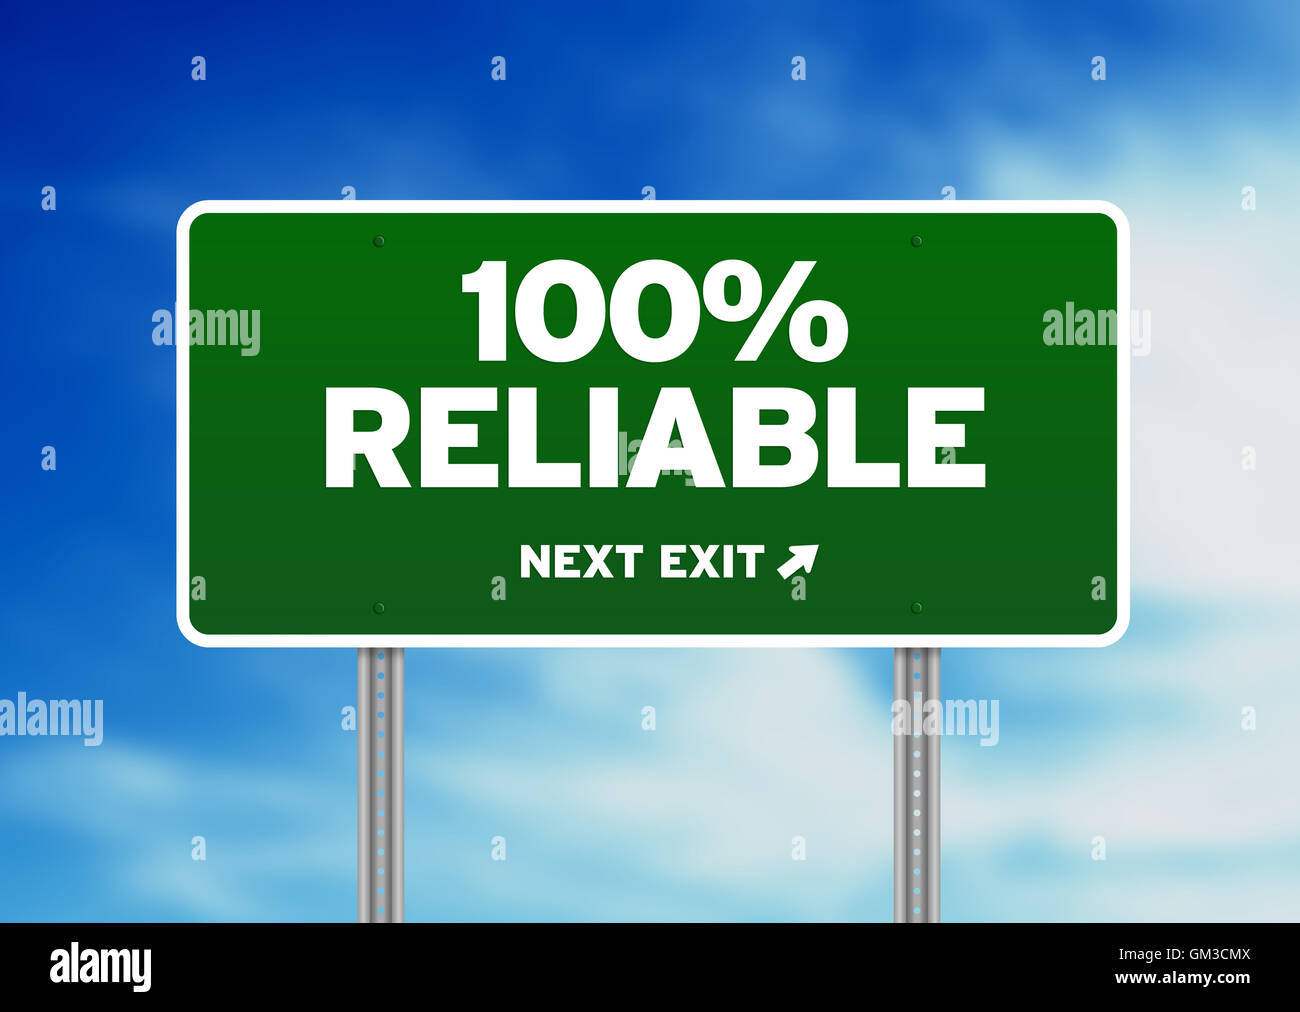 100% Reliable Road Sign Stock Photo